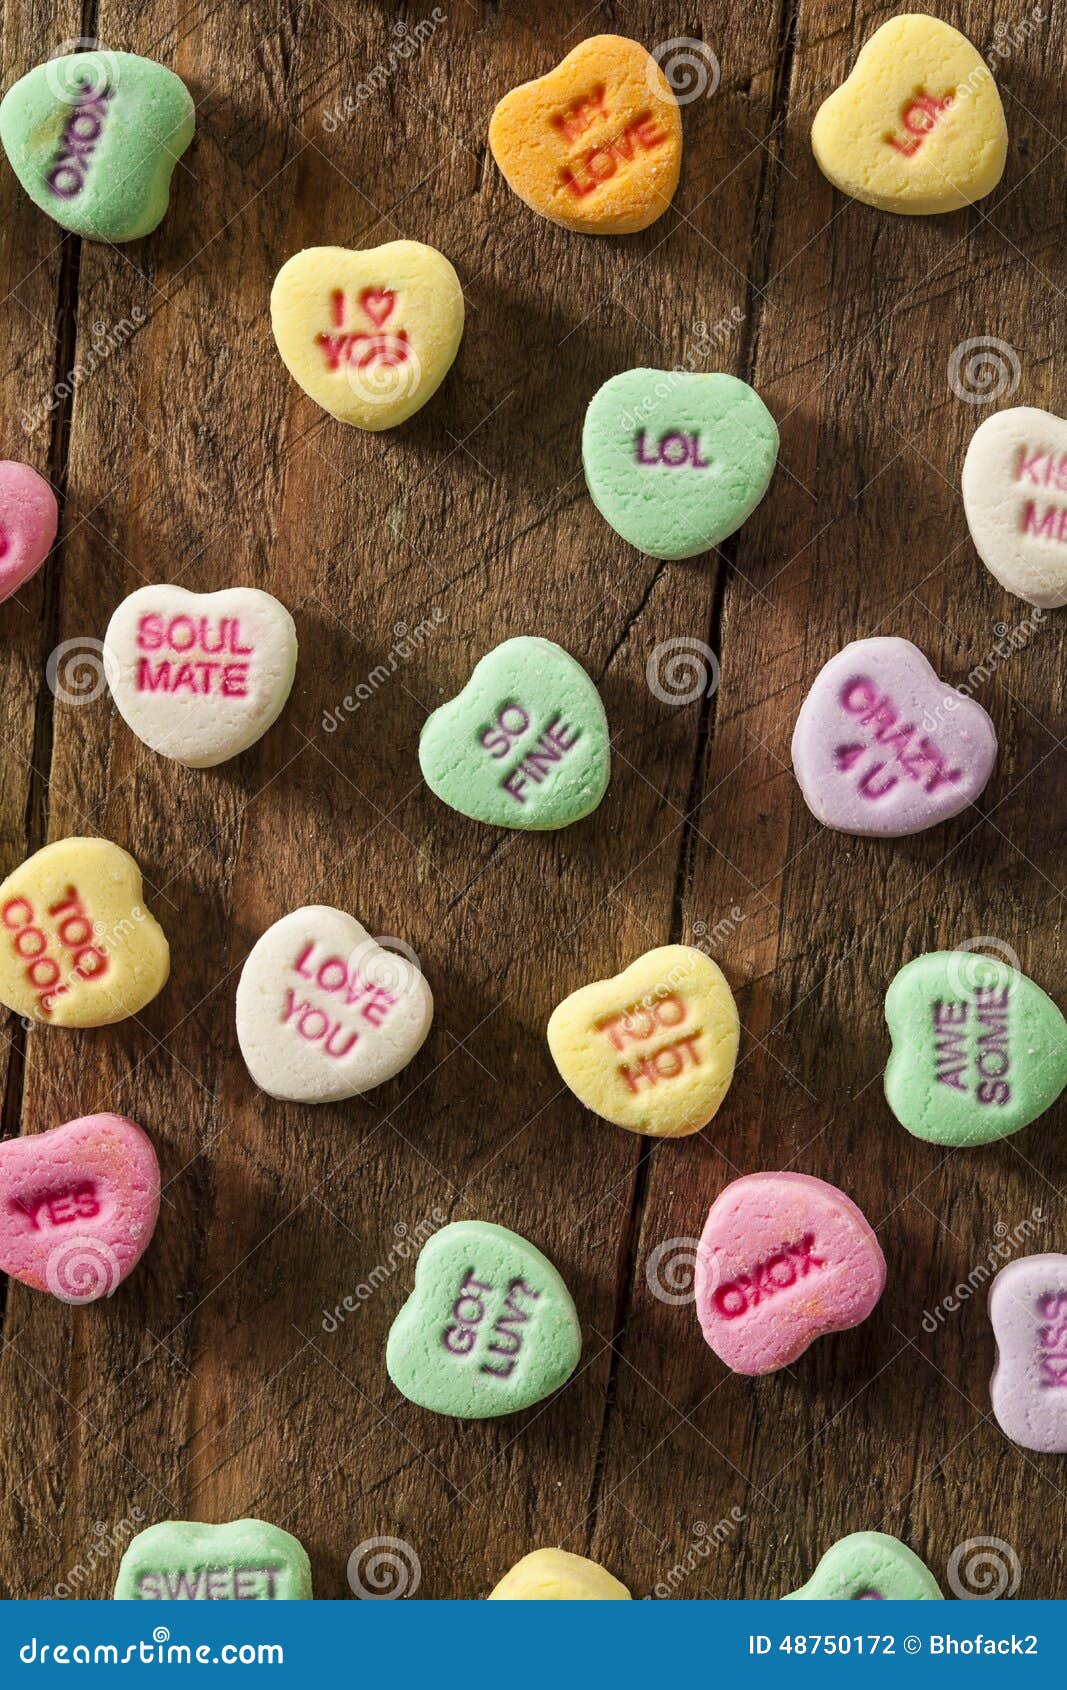 Colorful Candy Conversation Hearts Stock Photo - Image of conversation ...